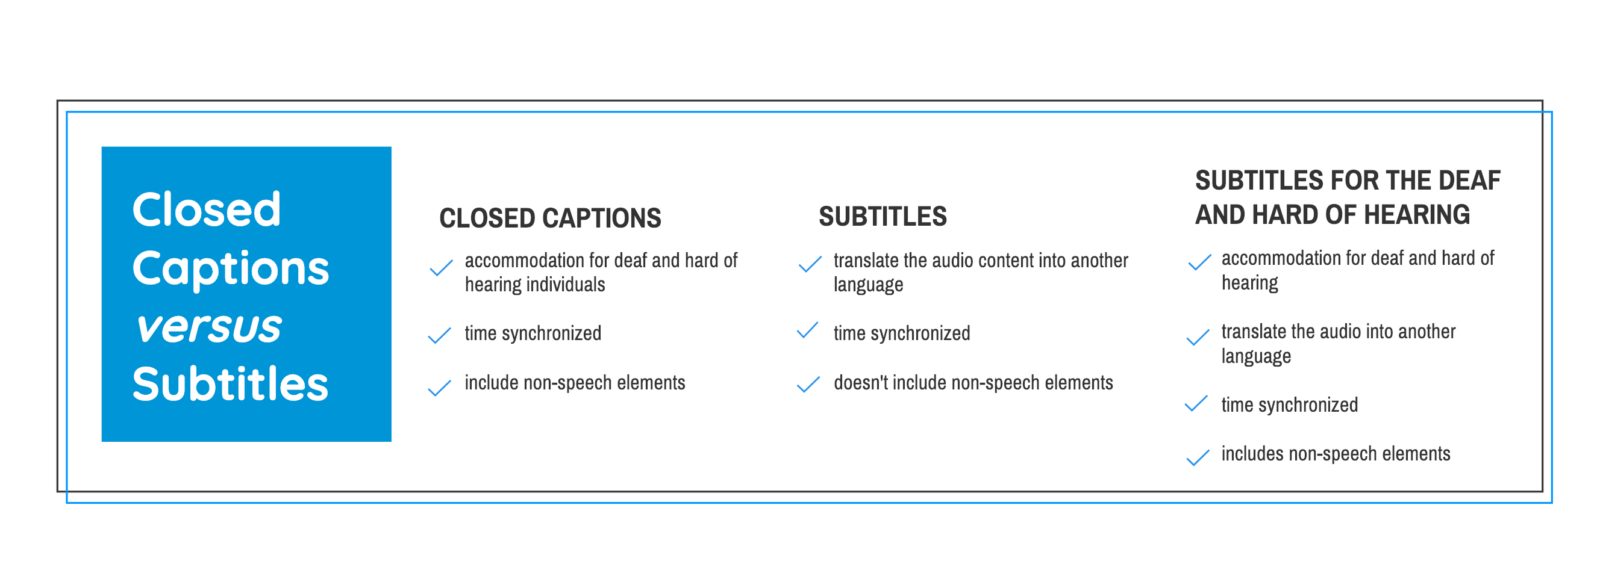 Closed Captions versus Subtitles. closed captions are an accommodation for the deaf and hard of hearing. subtitles translate the audio and are not an accomodation. subtitles for the deaf and hard of hearing translate the audio and are an accommodation 